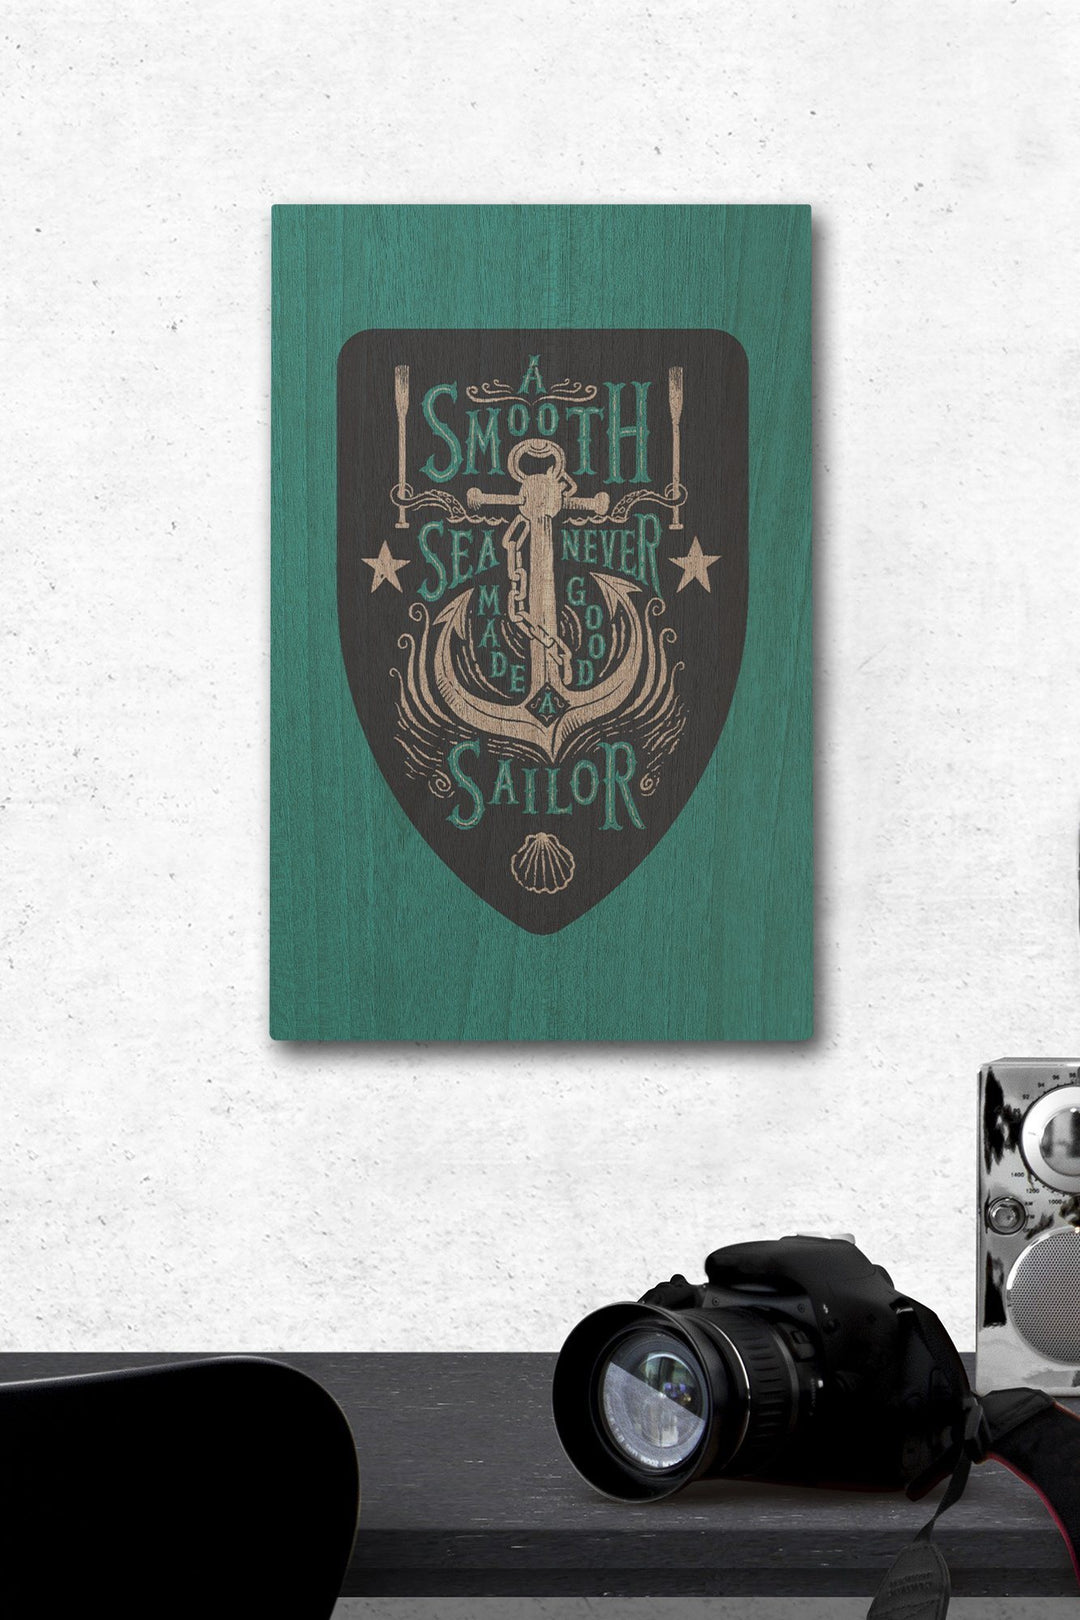 Sailor's Pride Collection, Anchor, A Smooth Sea Never Made A Good Sailor, Contour, Wood Signs and Postcards Wood Lantern Press 